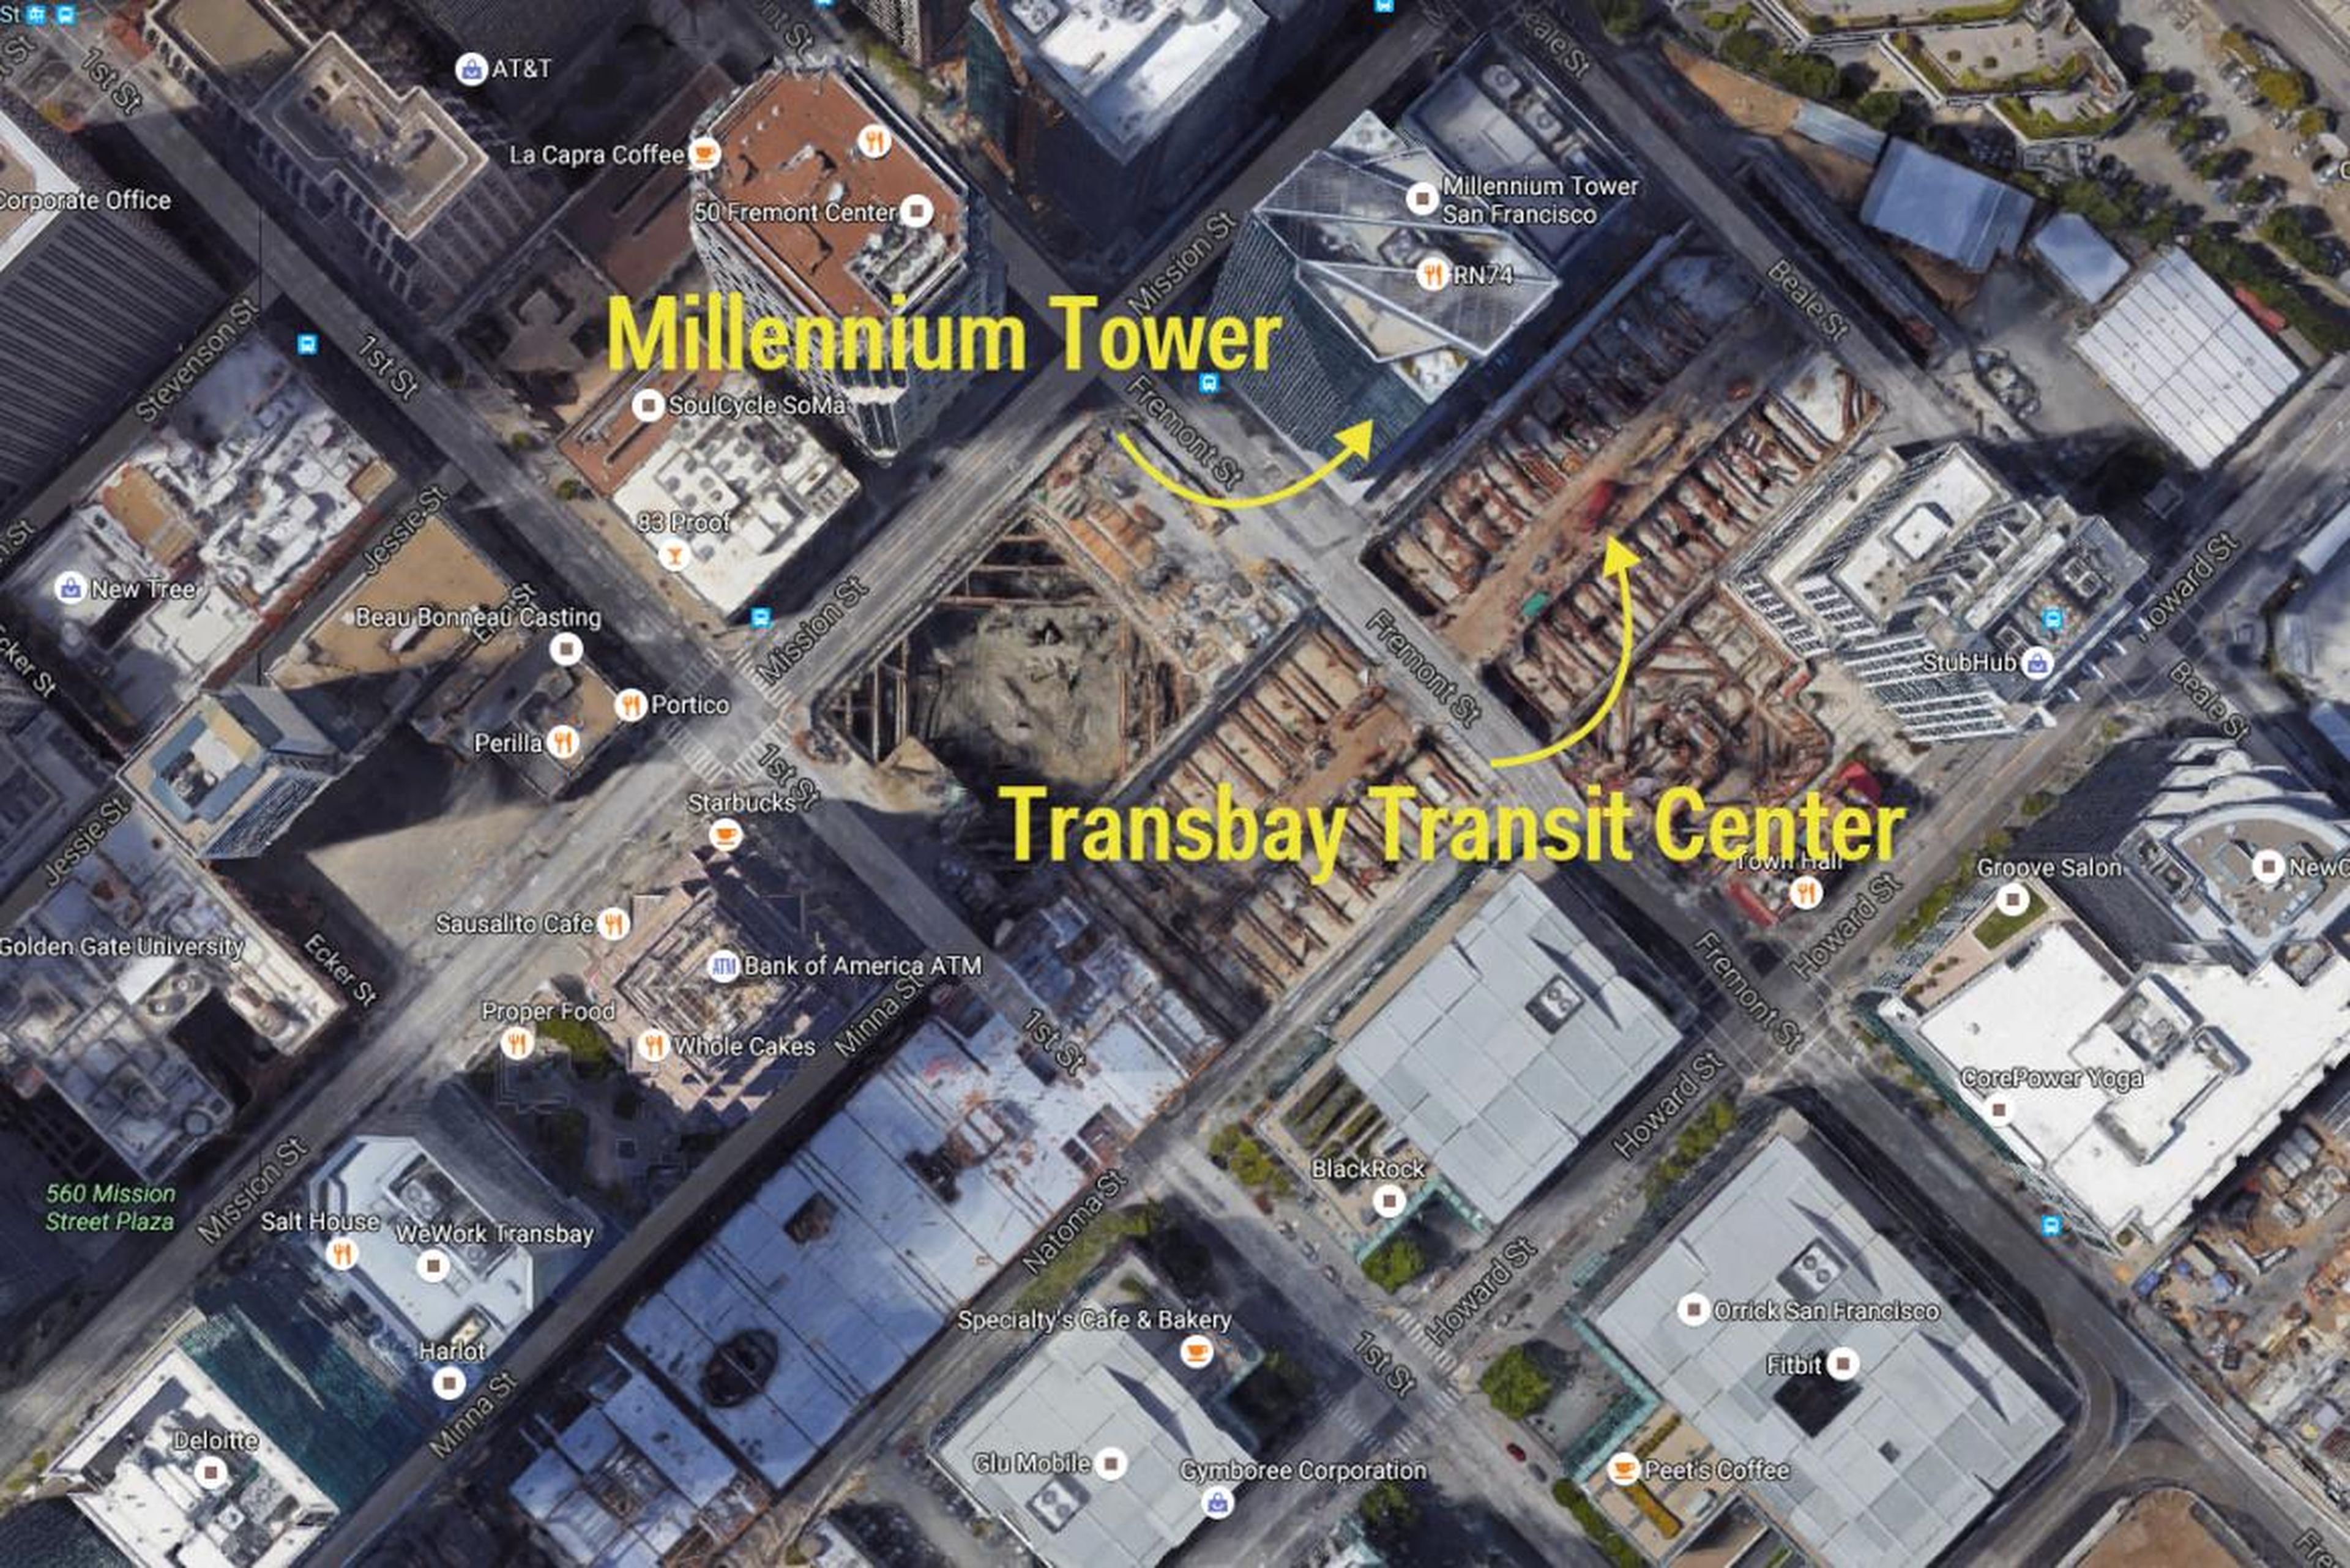 All was well until 2010, when construction began on the Salesforce Transit Center (formerly the Transbay Transit Center) next door.